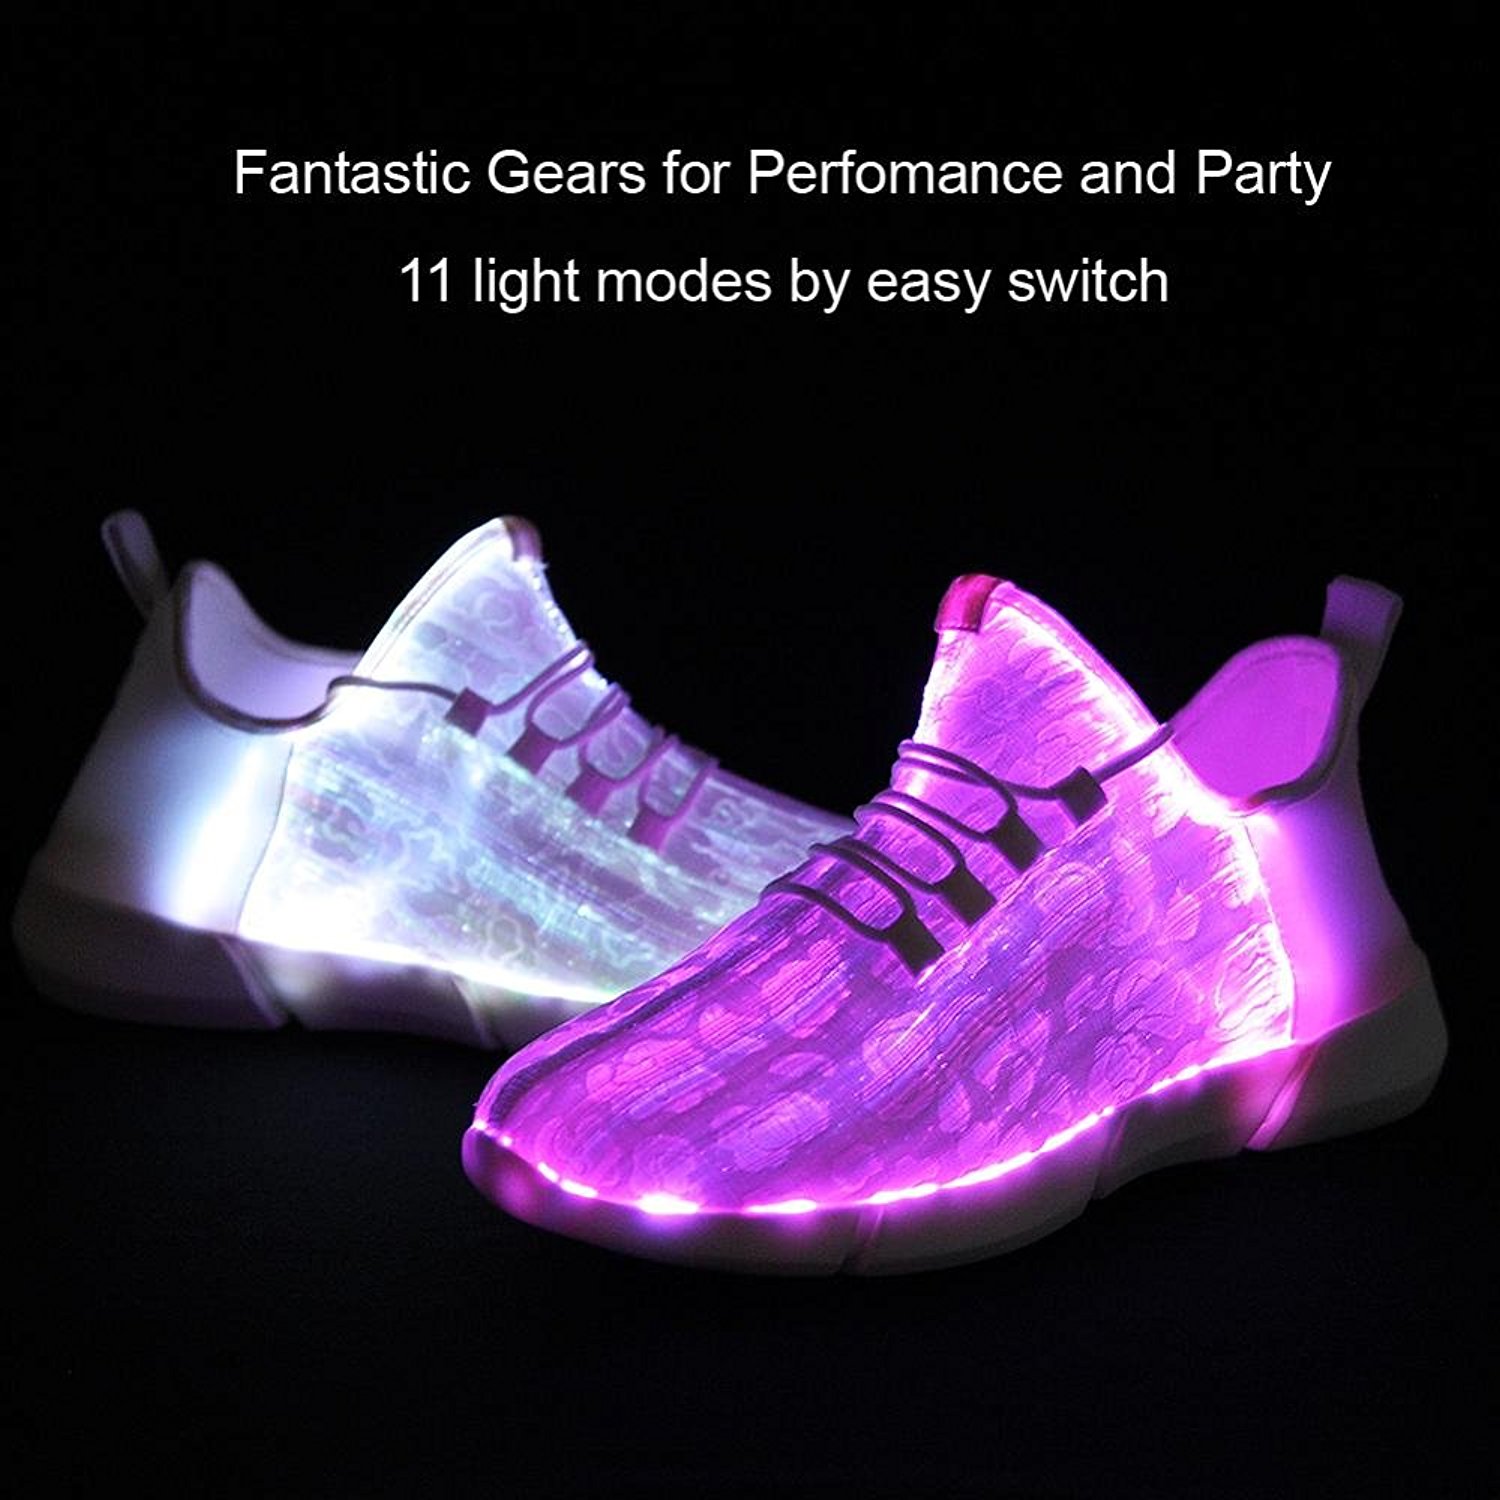 shoes that light up with flash